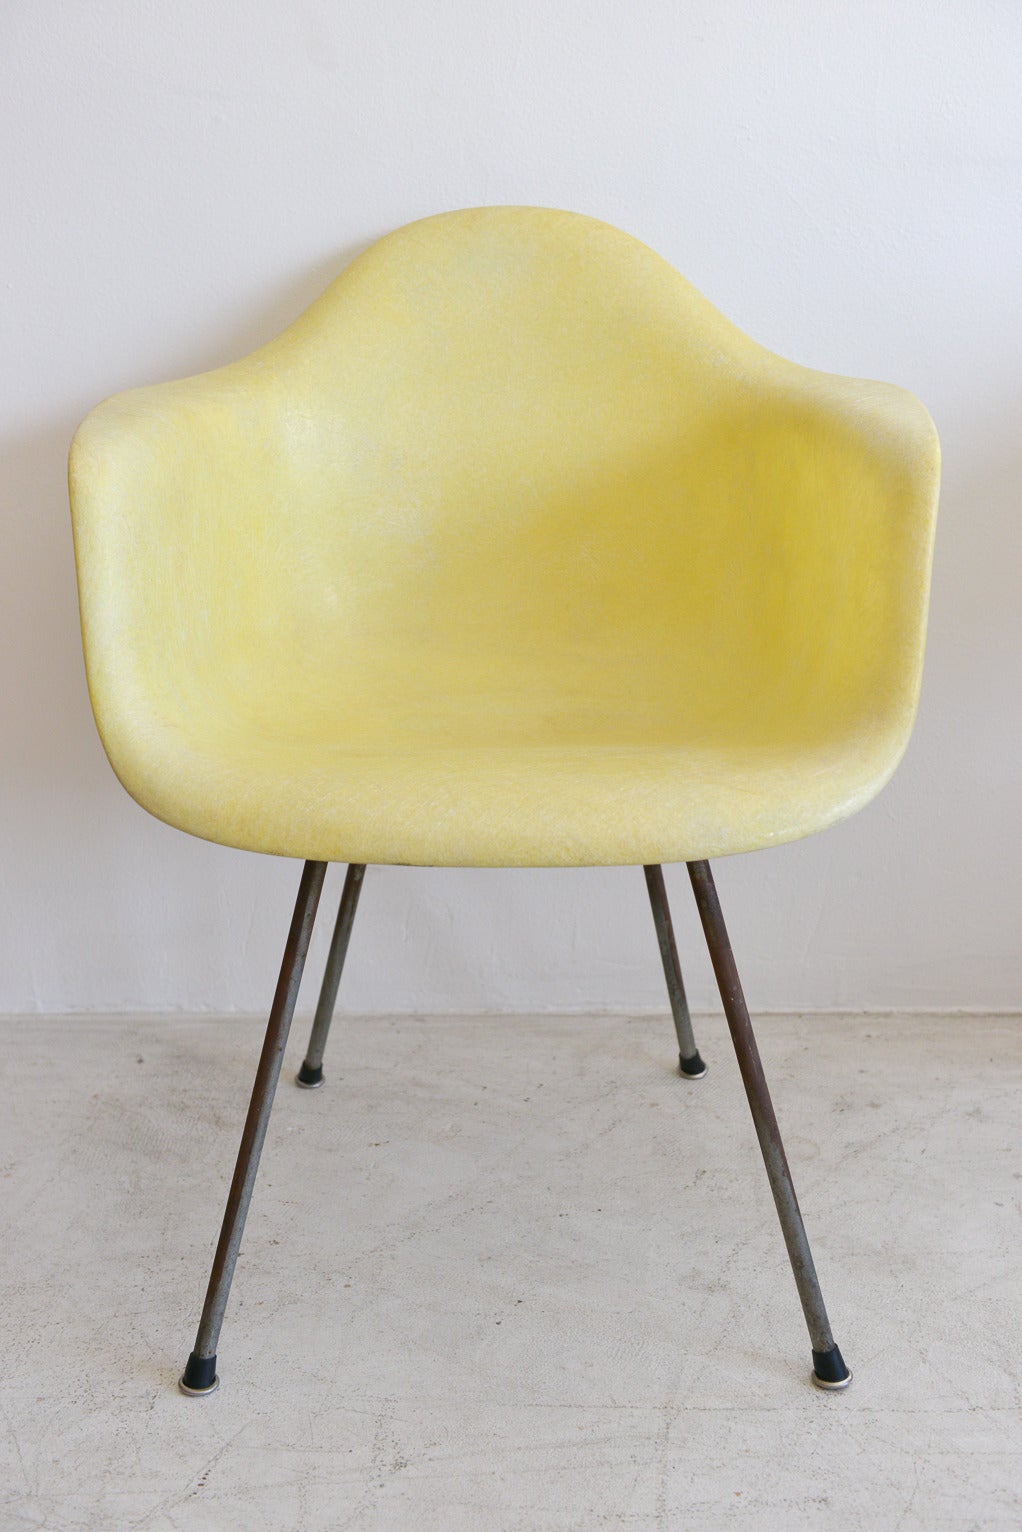 Beautiful early Charles Eames for Herman Miller Rope Edge armchair with fiberglass shell by Zenith Plastics.  Early production model, beautiful zinc x-base with rope edge in lemon yellow.  Original large shock mounts.  This chair is in excellent